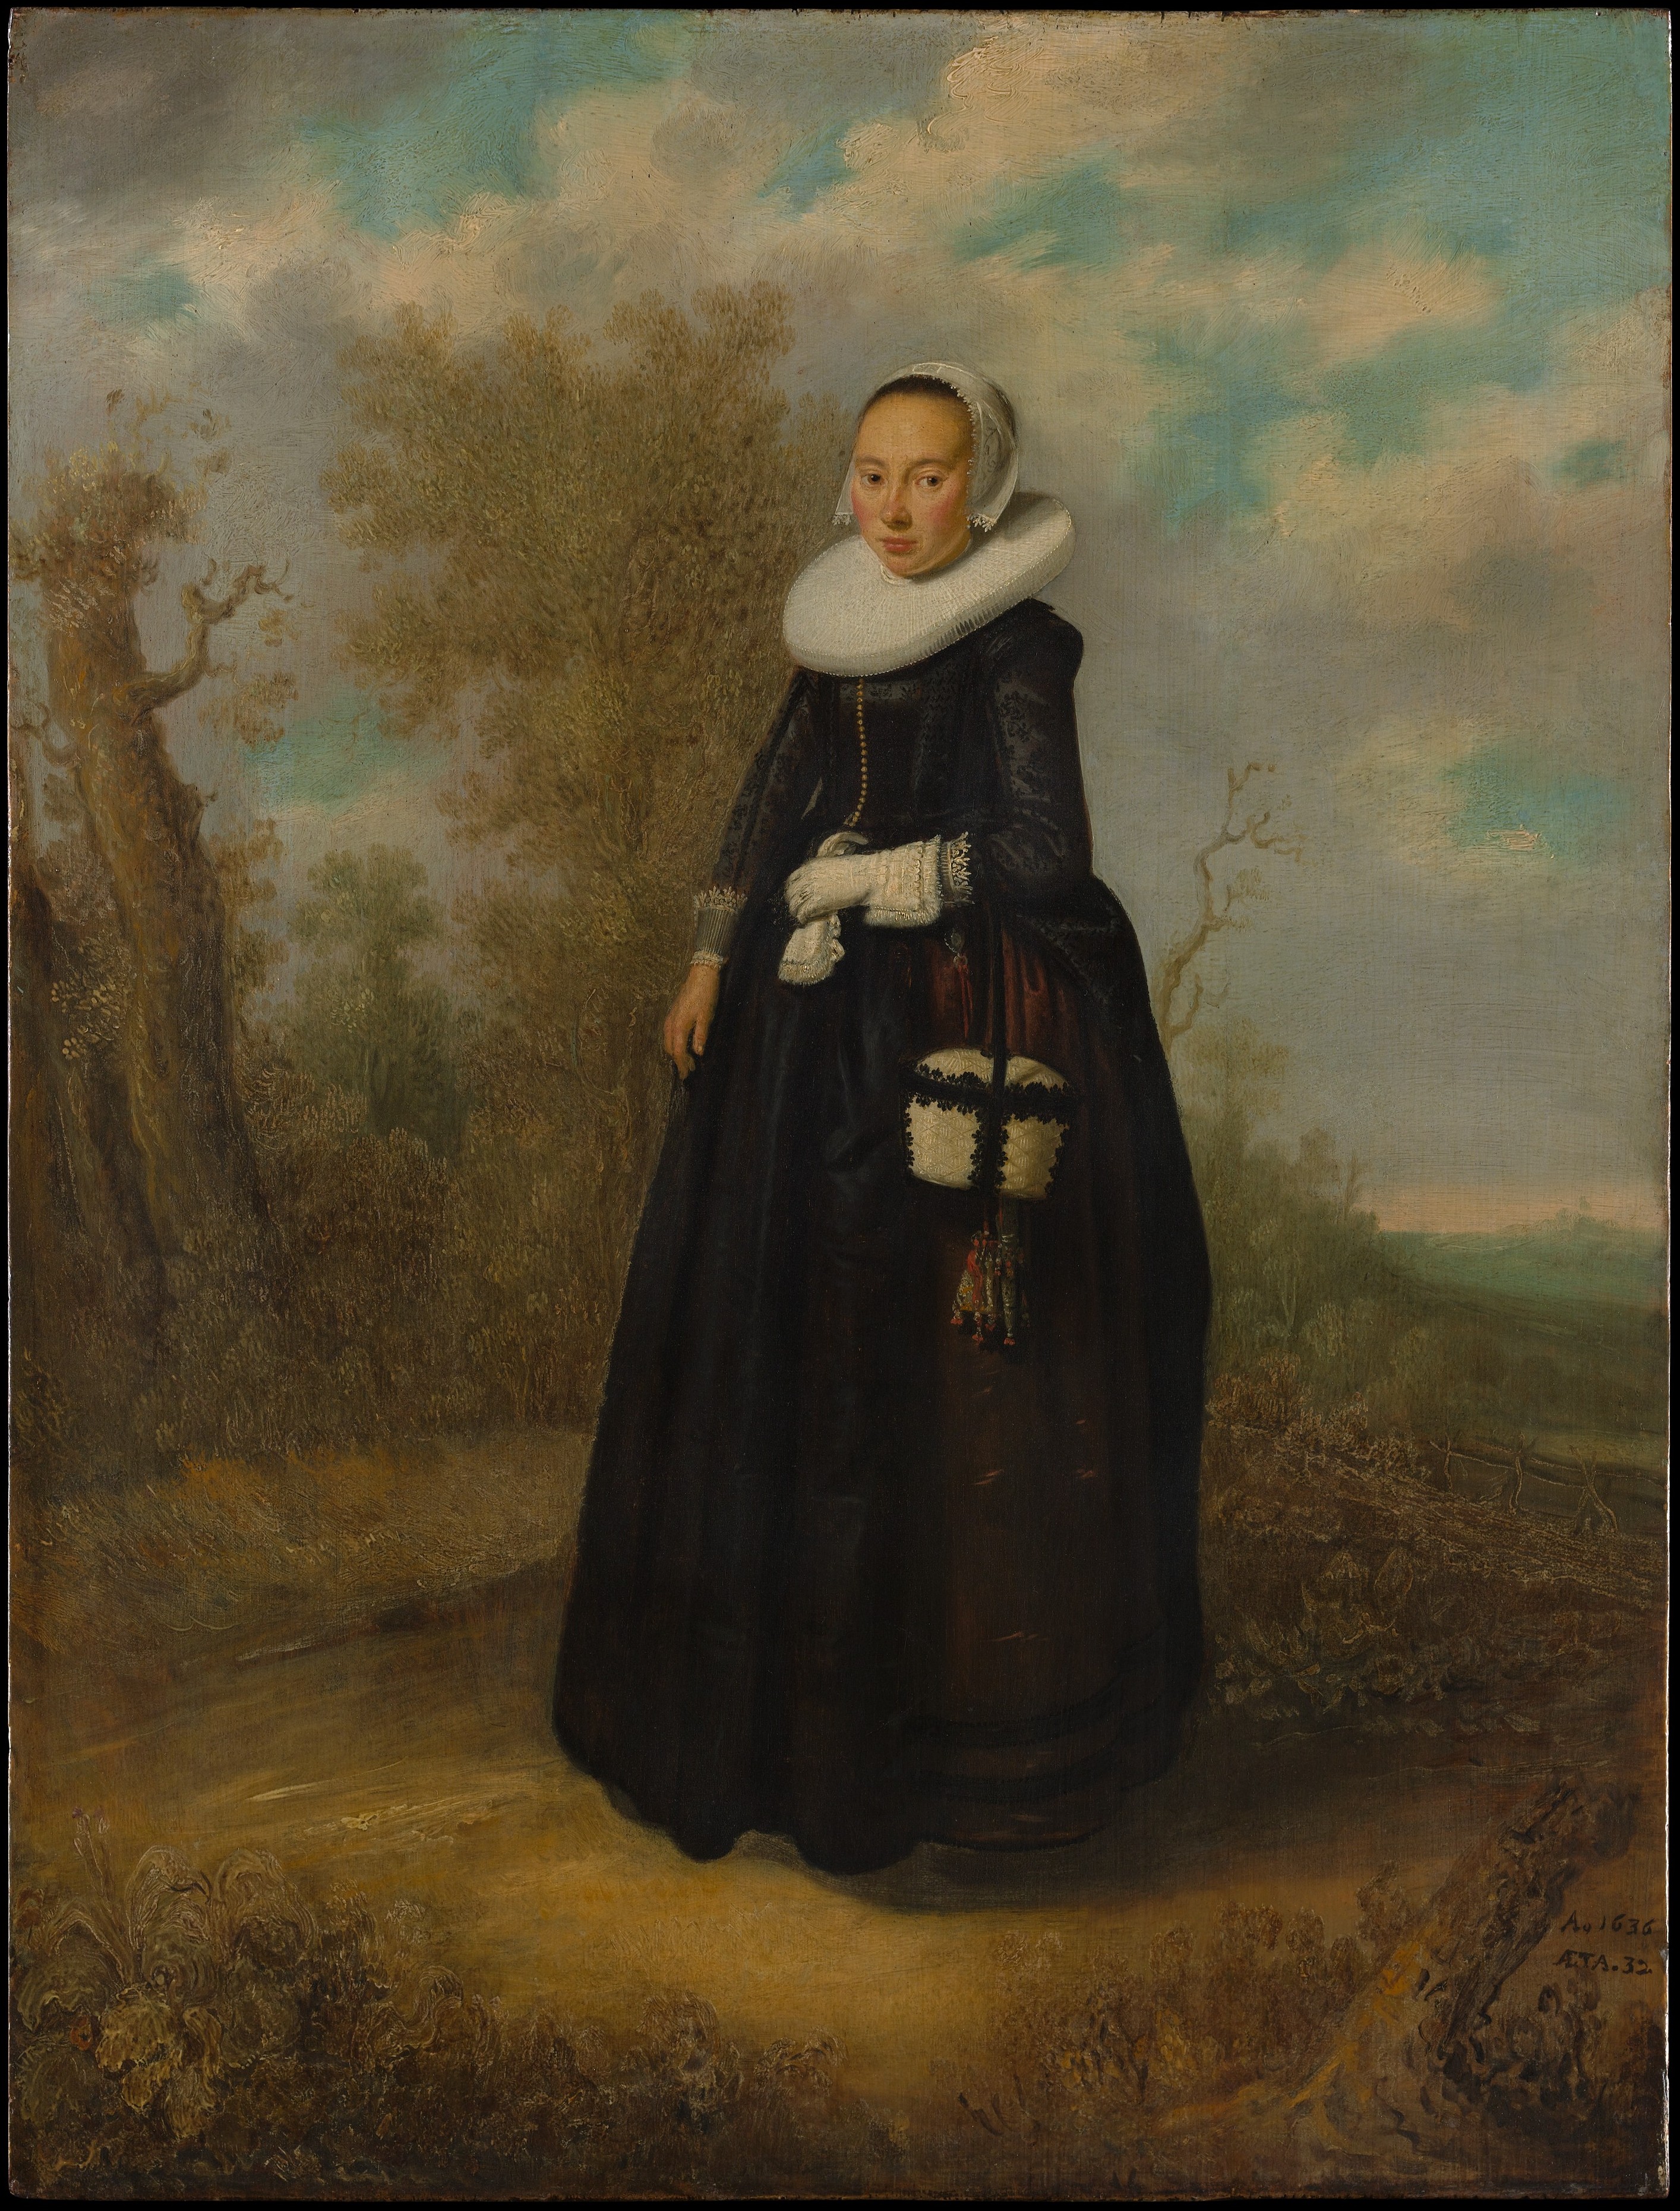 A Young Woman in a Landscape by Unknown Artist - 1636 - 66 x 50.5 cm Metropolitan Museum of Art